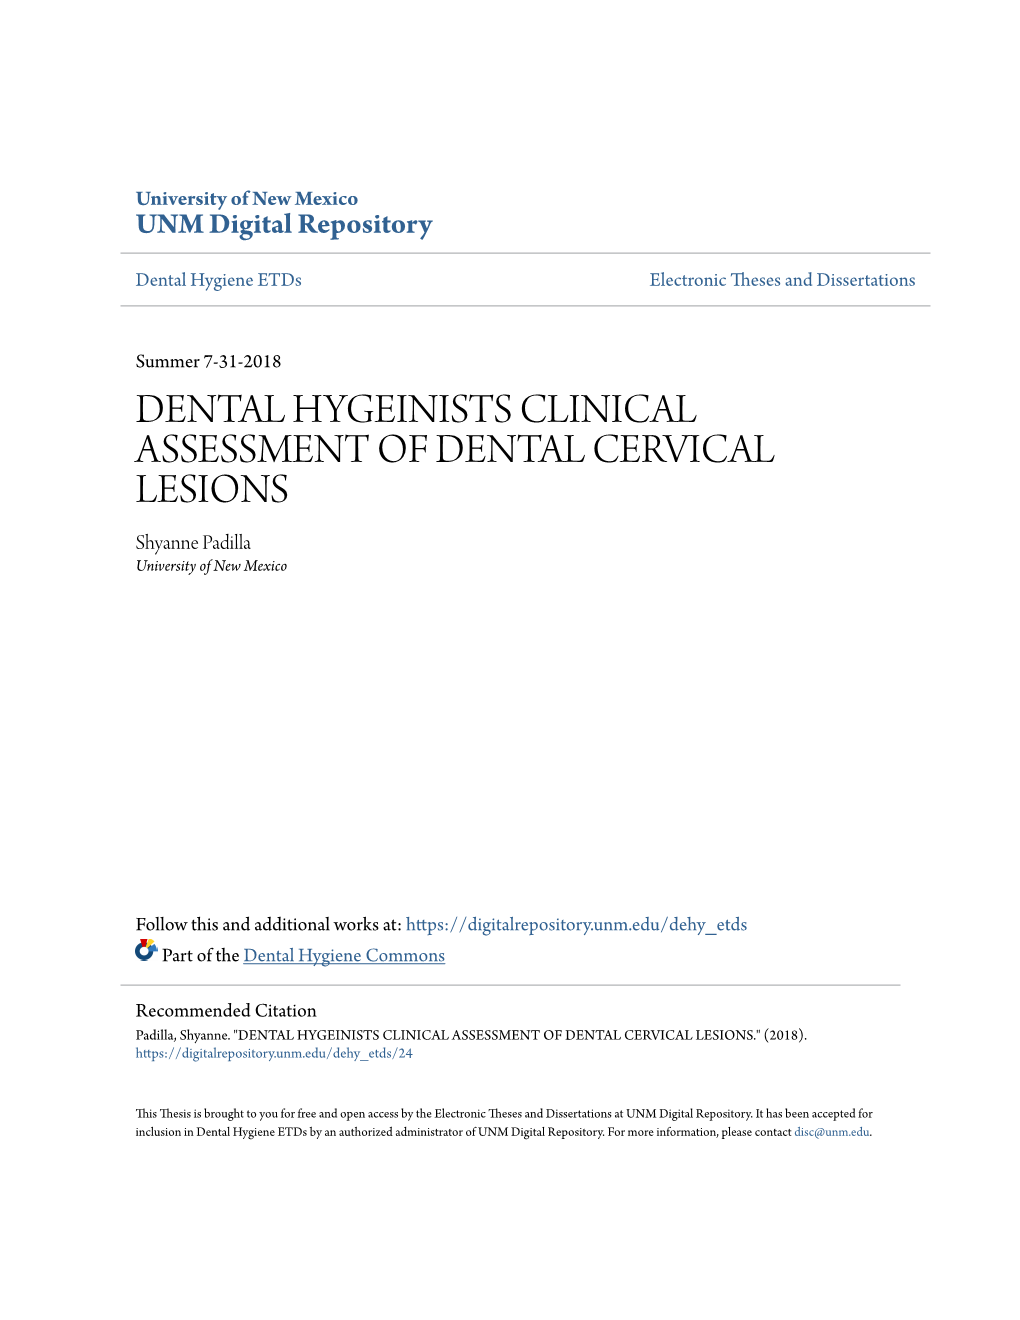 DENTAL HYGEINISTS CLINICAL ASSESSMENT of DENTAL CERVICAL LESIONS Shyanne Padilla University of New Mexico